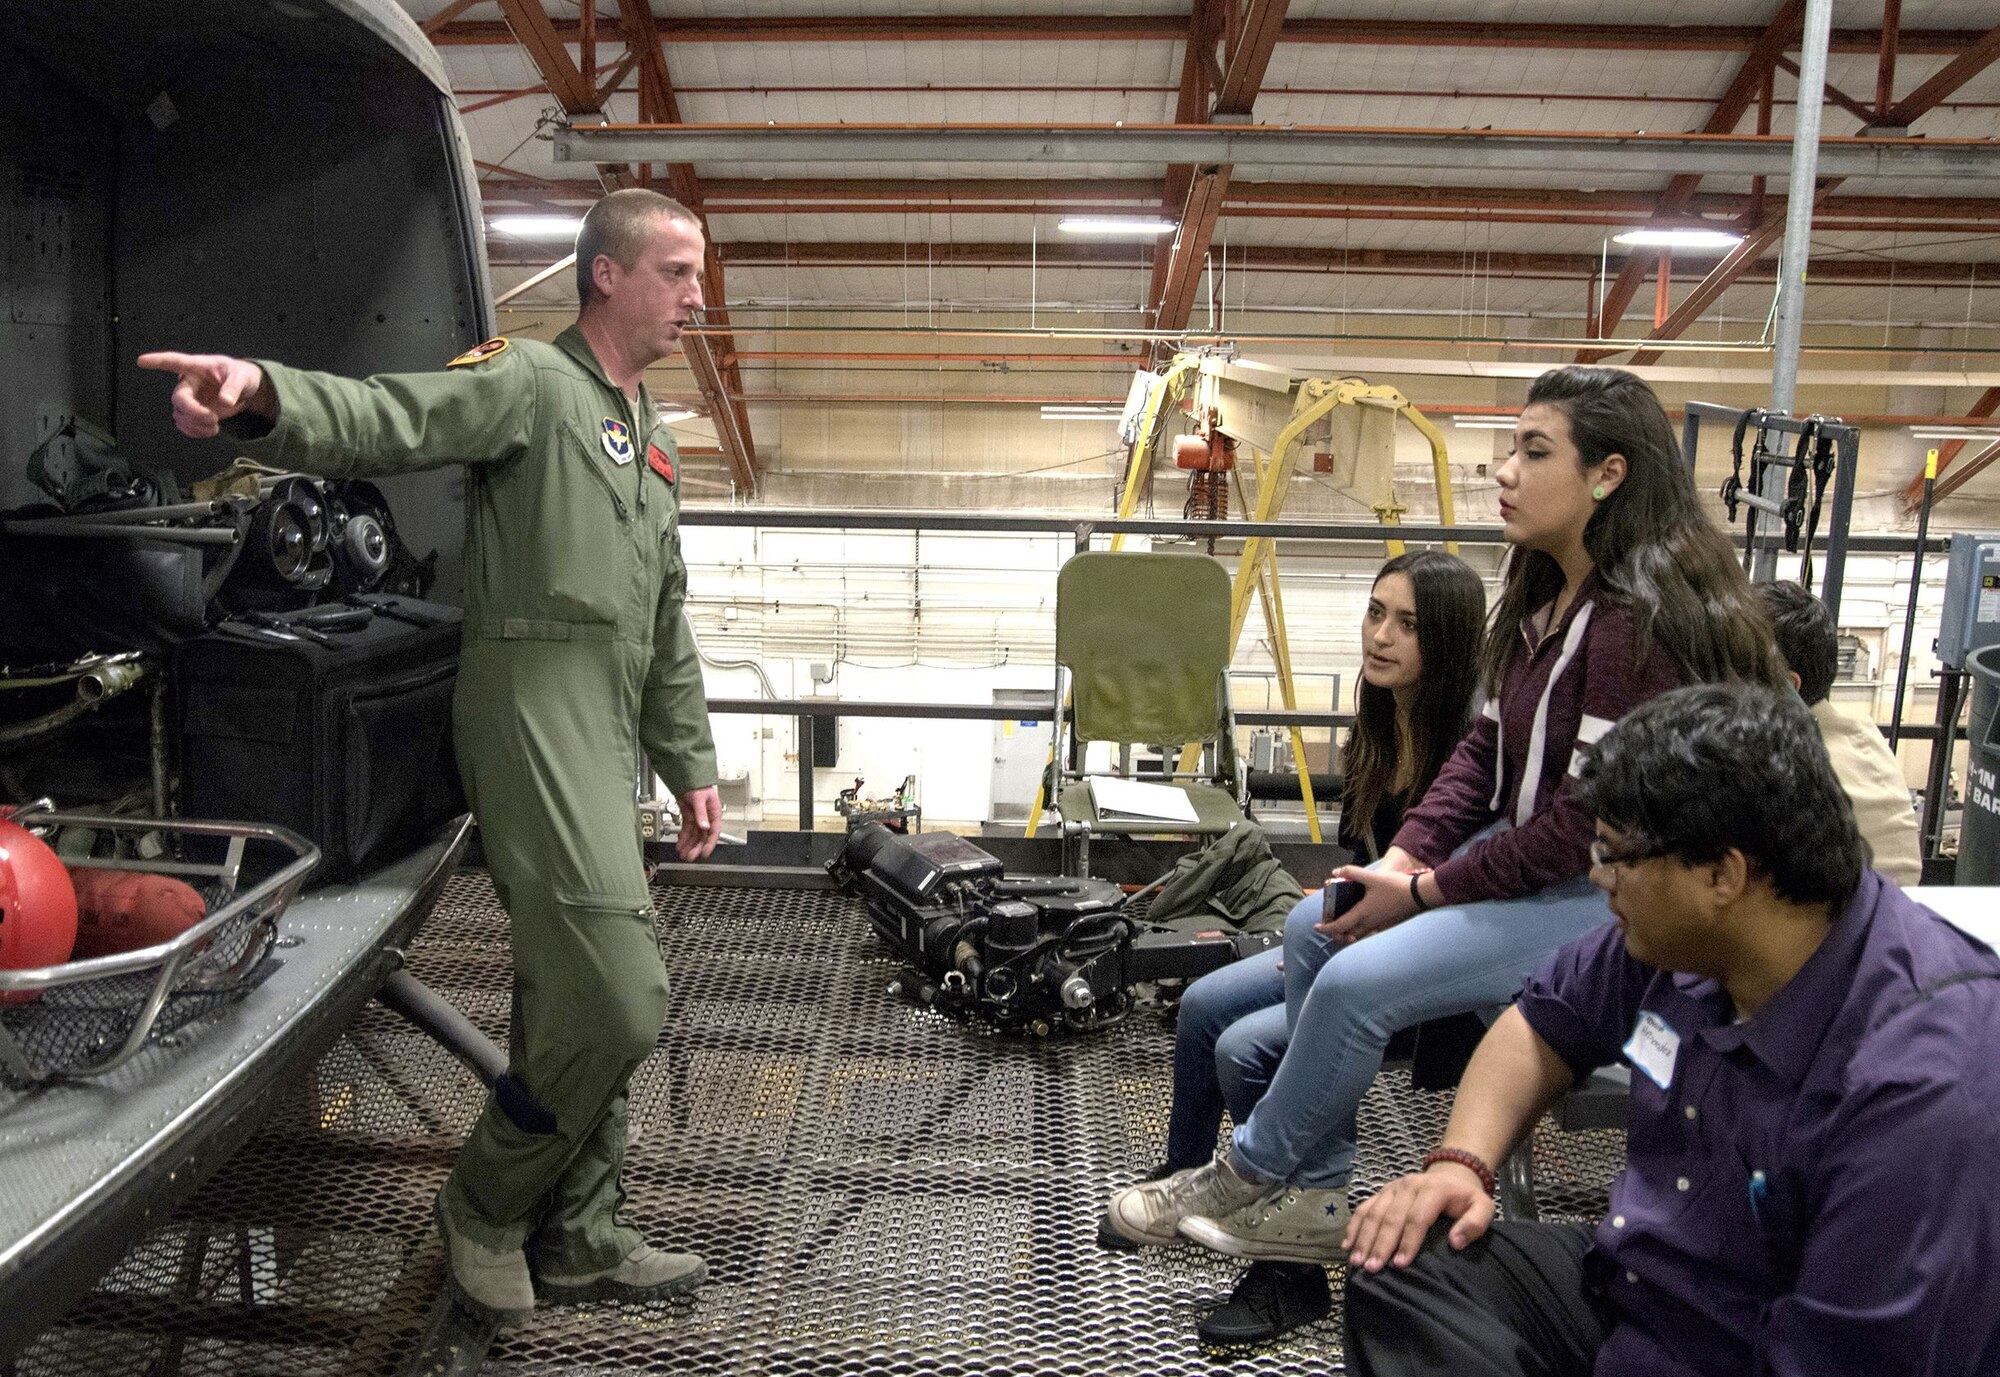 Staff Sgt. Eric Jensen, an instructor with the 58th Training Squadron, talks to students from Robert F. Kennedy Charter School in Albuquerque Feb. 1. The students visited several areas in the 58th Special Operations Wing as part of the Junior Achievement Job Shadow Program.